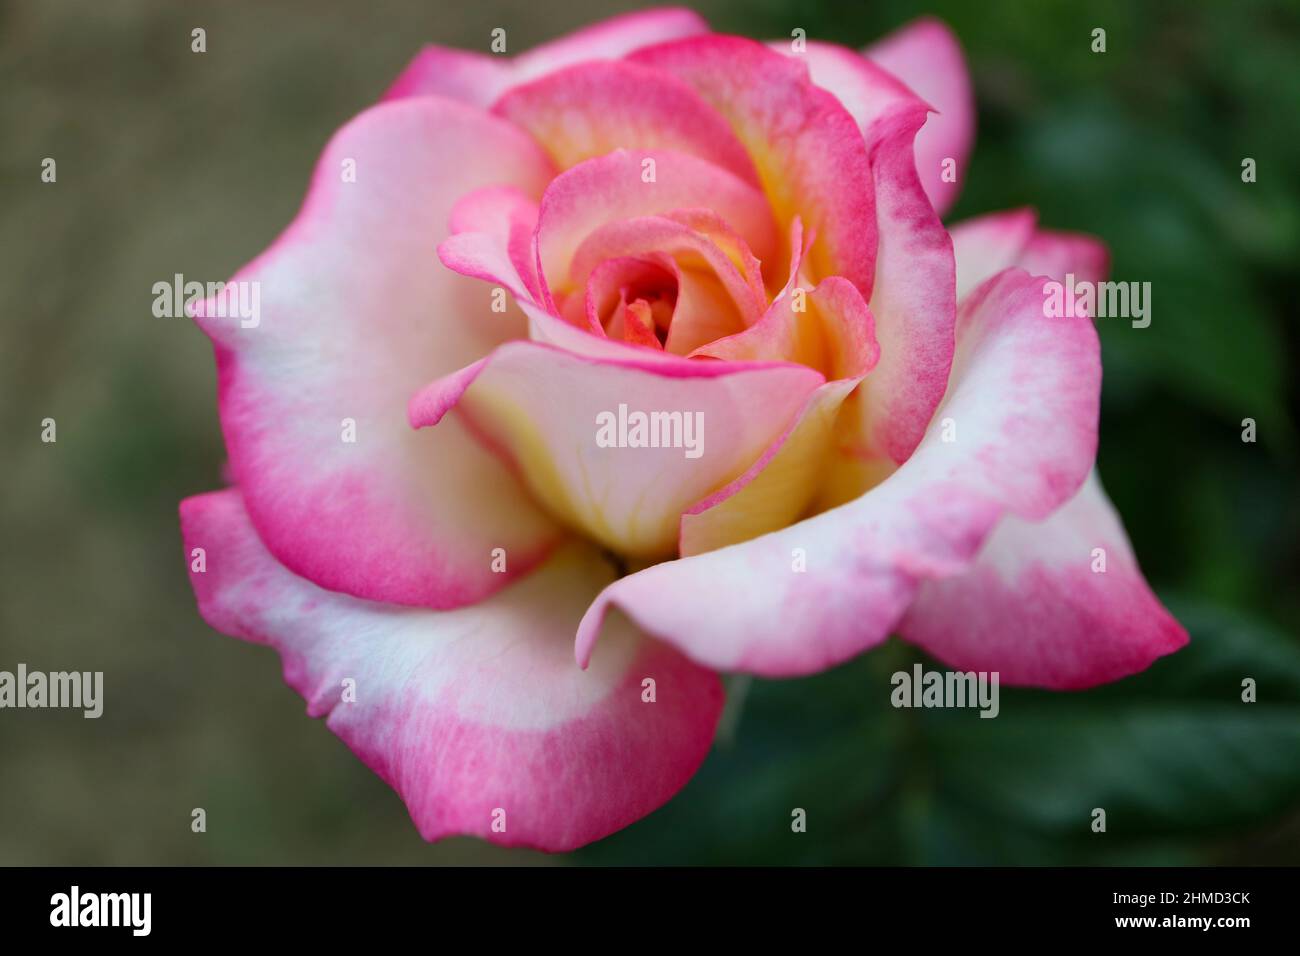 Rose with white , pink  and yellow petals and green leaves, colorful rose in the garden, rose head macro, blooming flower, beauty in nature, floral Stock Photo